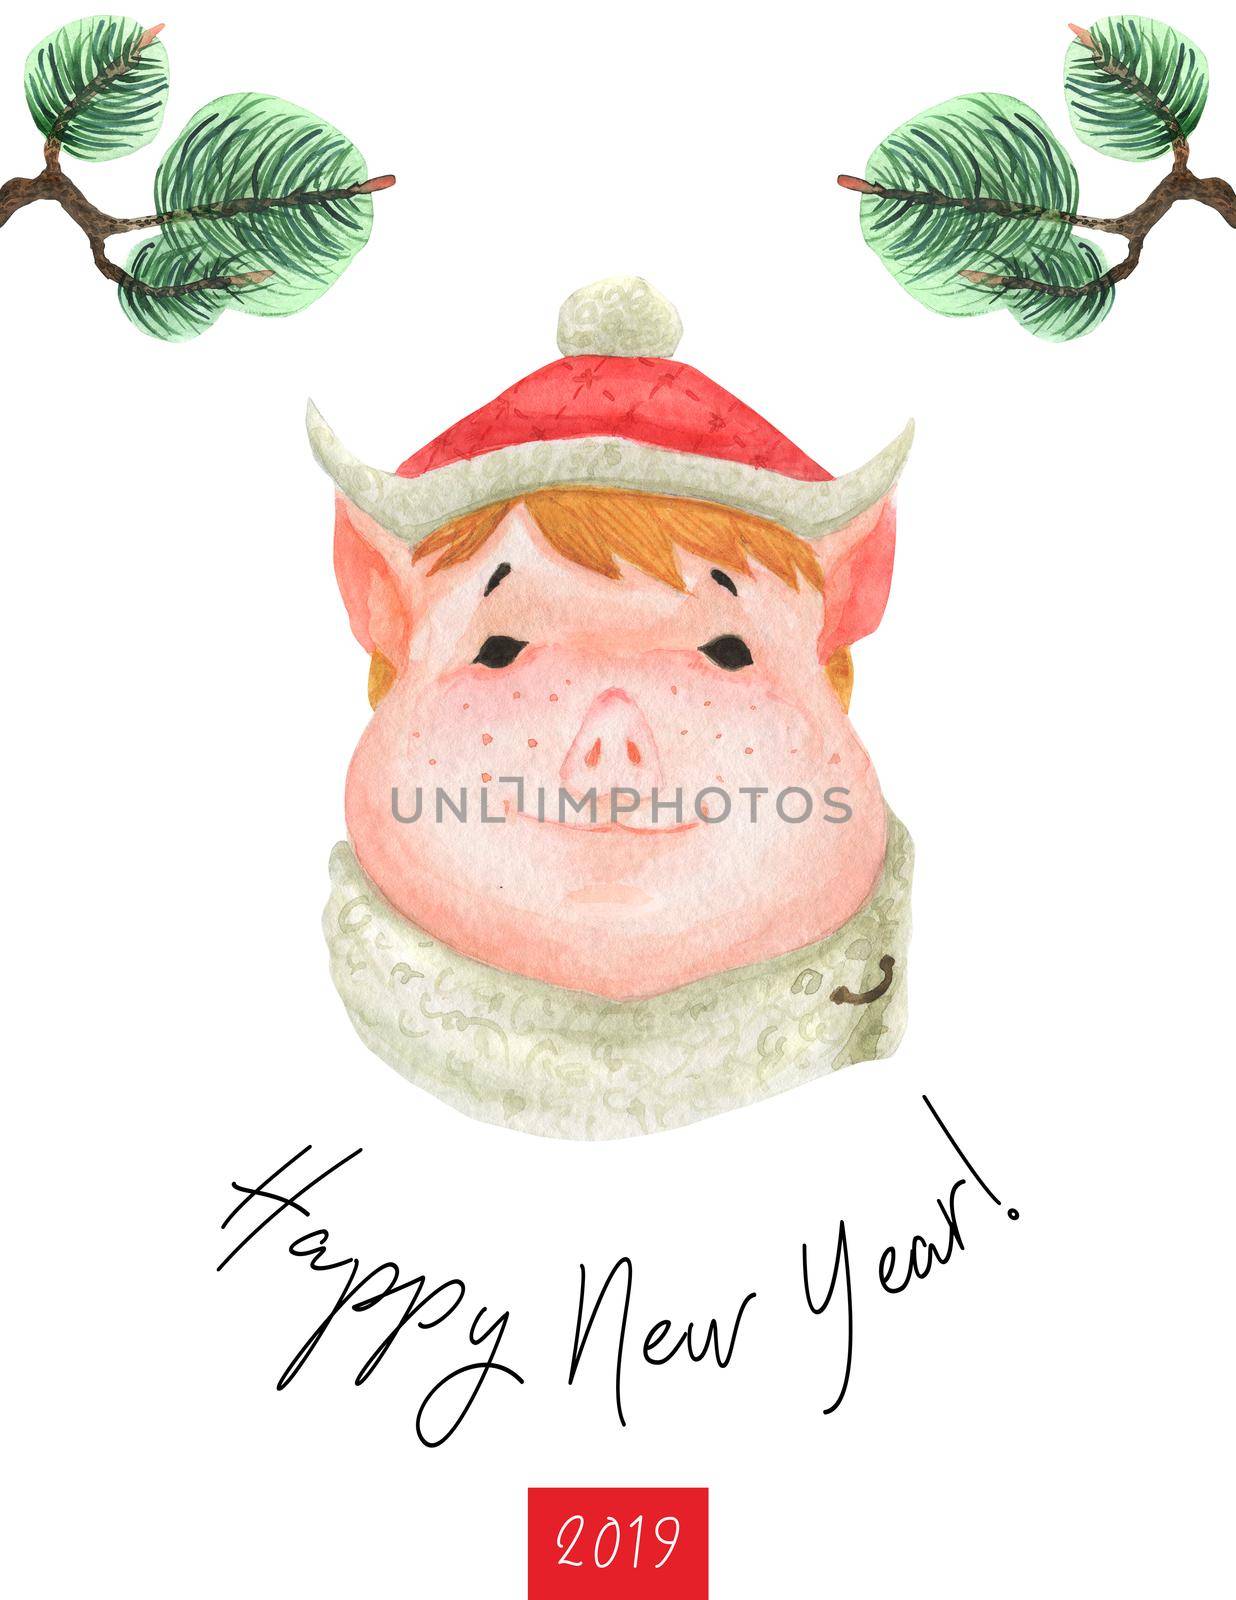 Happy New Year postcard 2019. Girl Teen Piggy in ethnic fur hat. Watercolor art, clipping path included